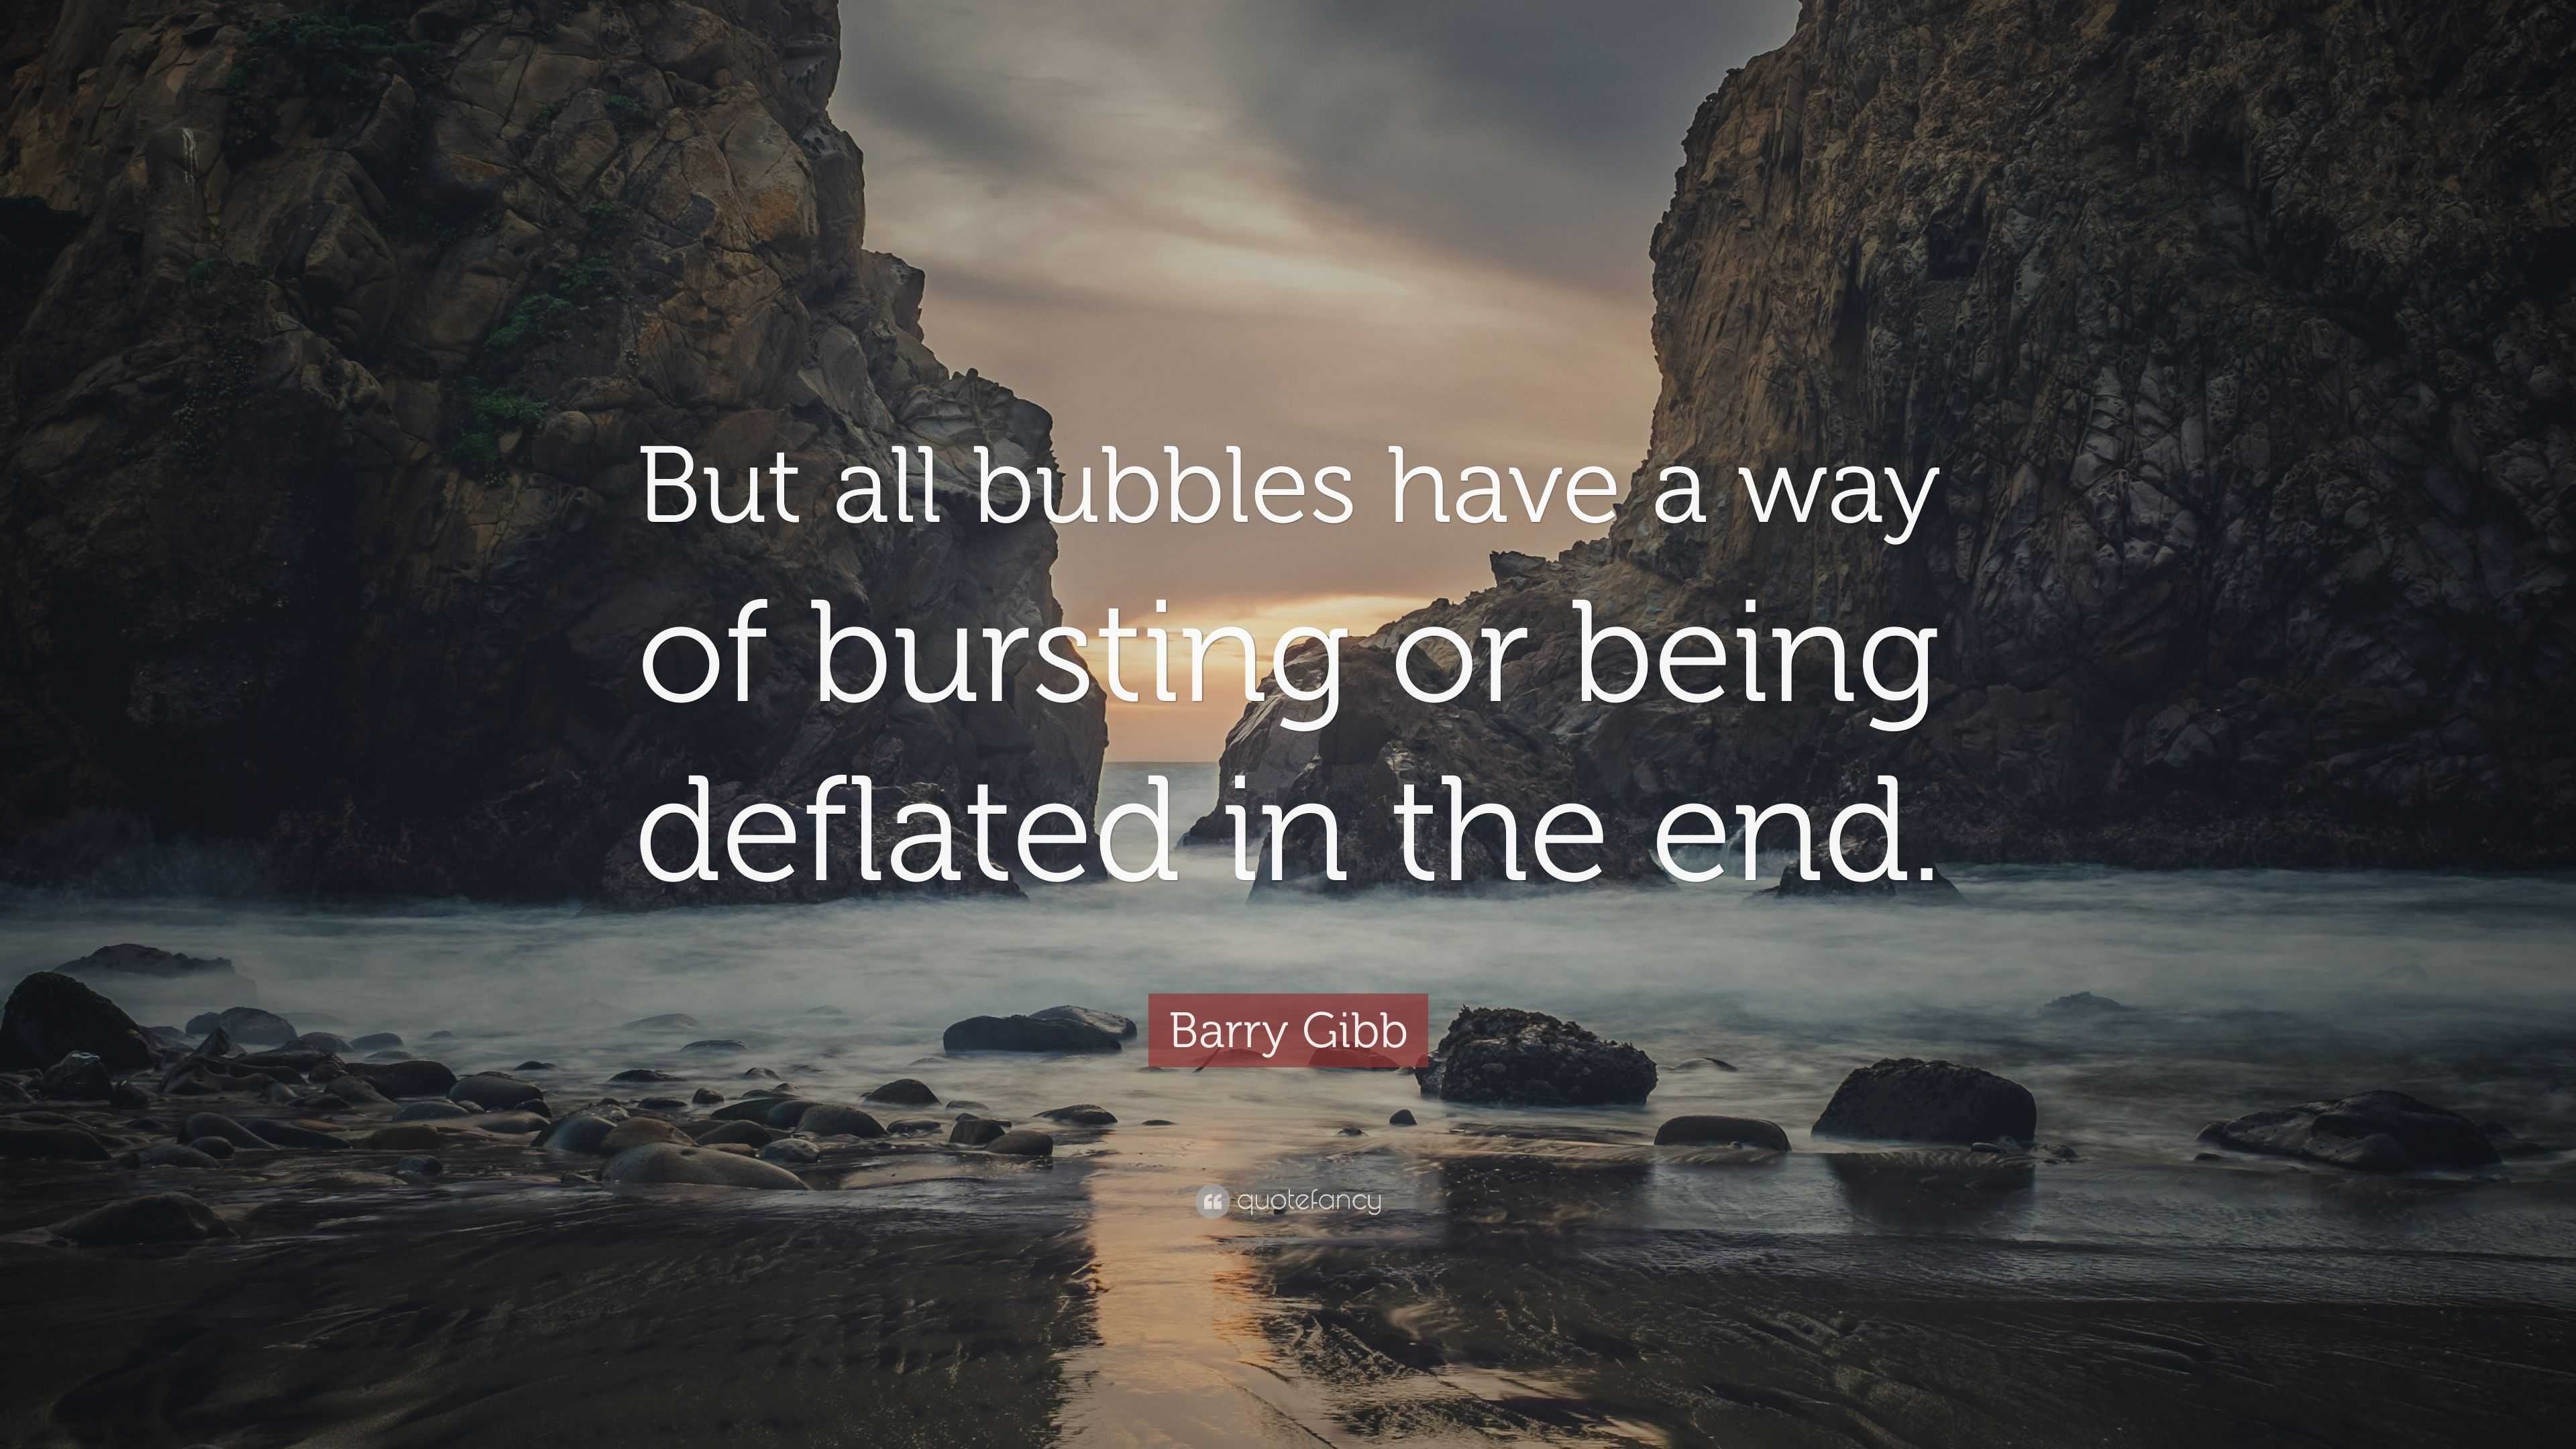 Barry Gibb Quote: “But all bubbles have a way of bursting or being